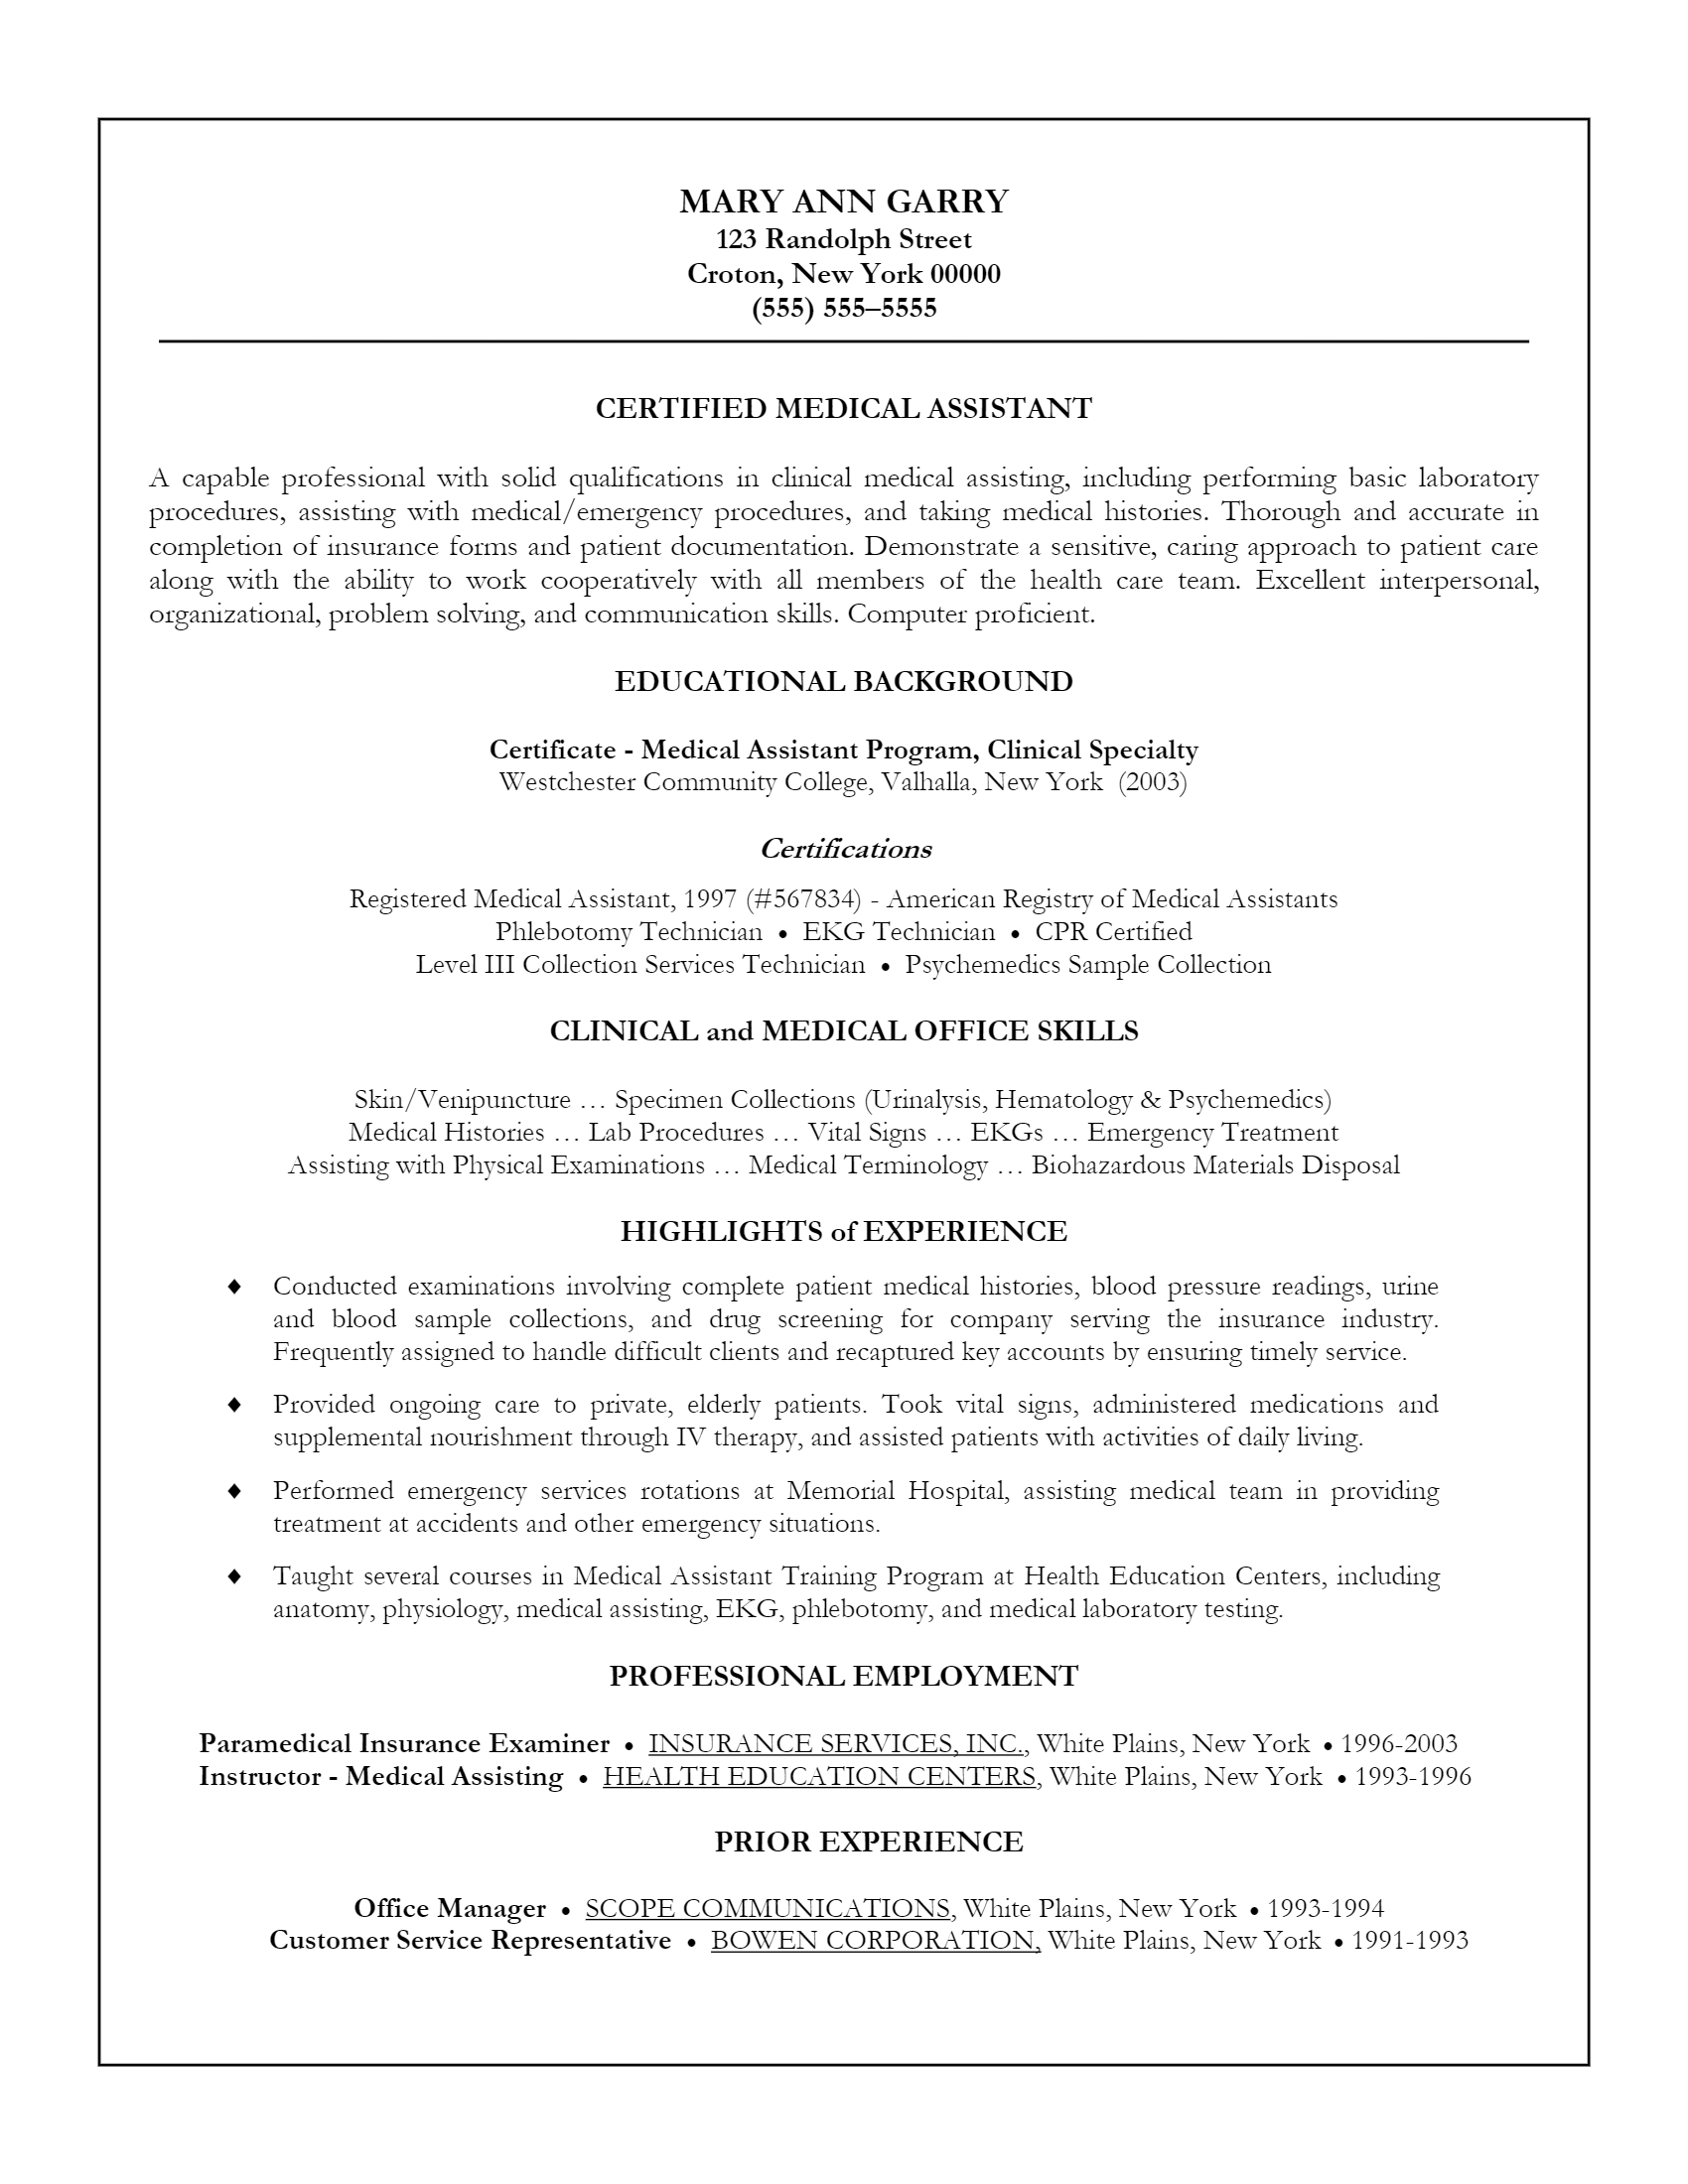 Medical Assistant Resume .Docx (Word)